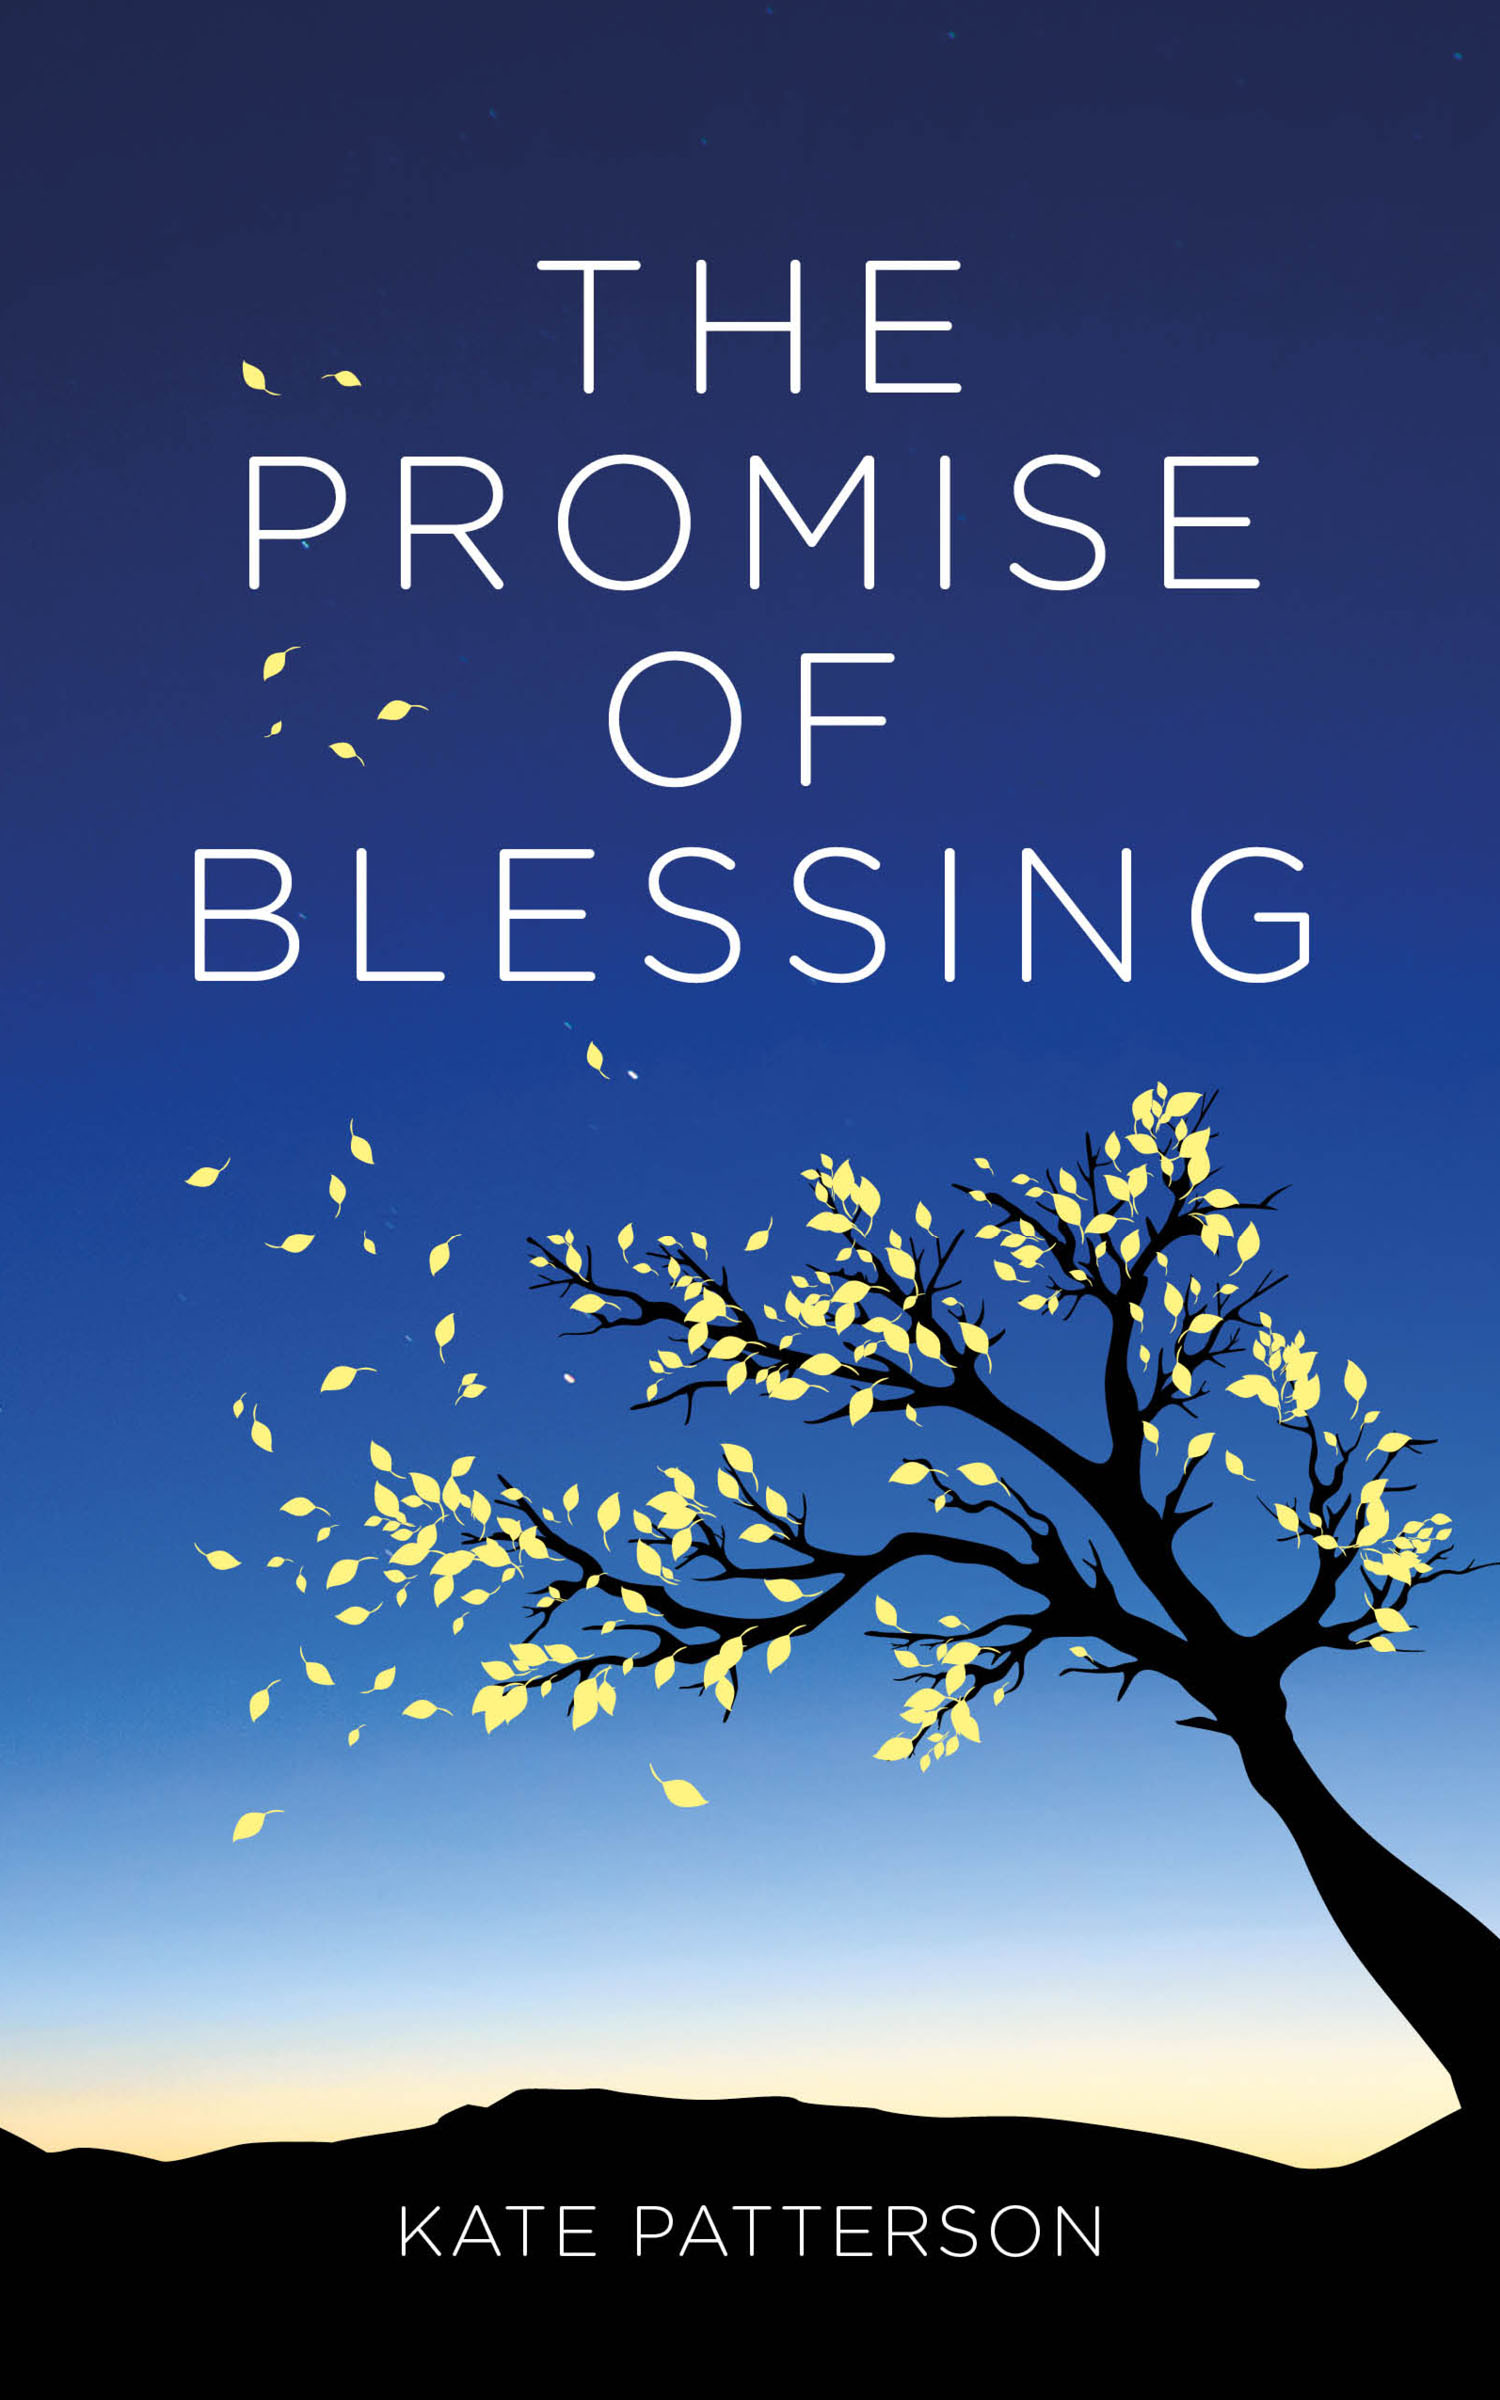 The Promise of Blessing